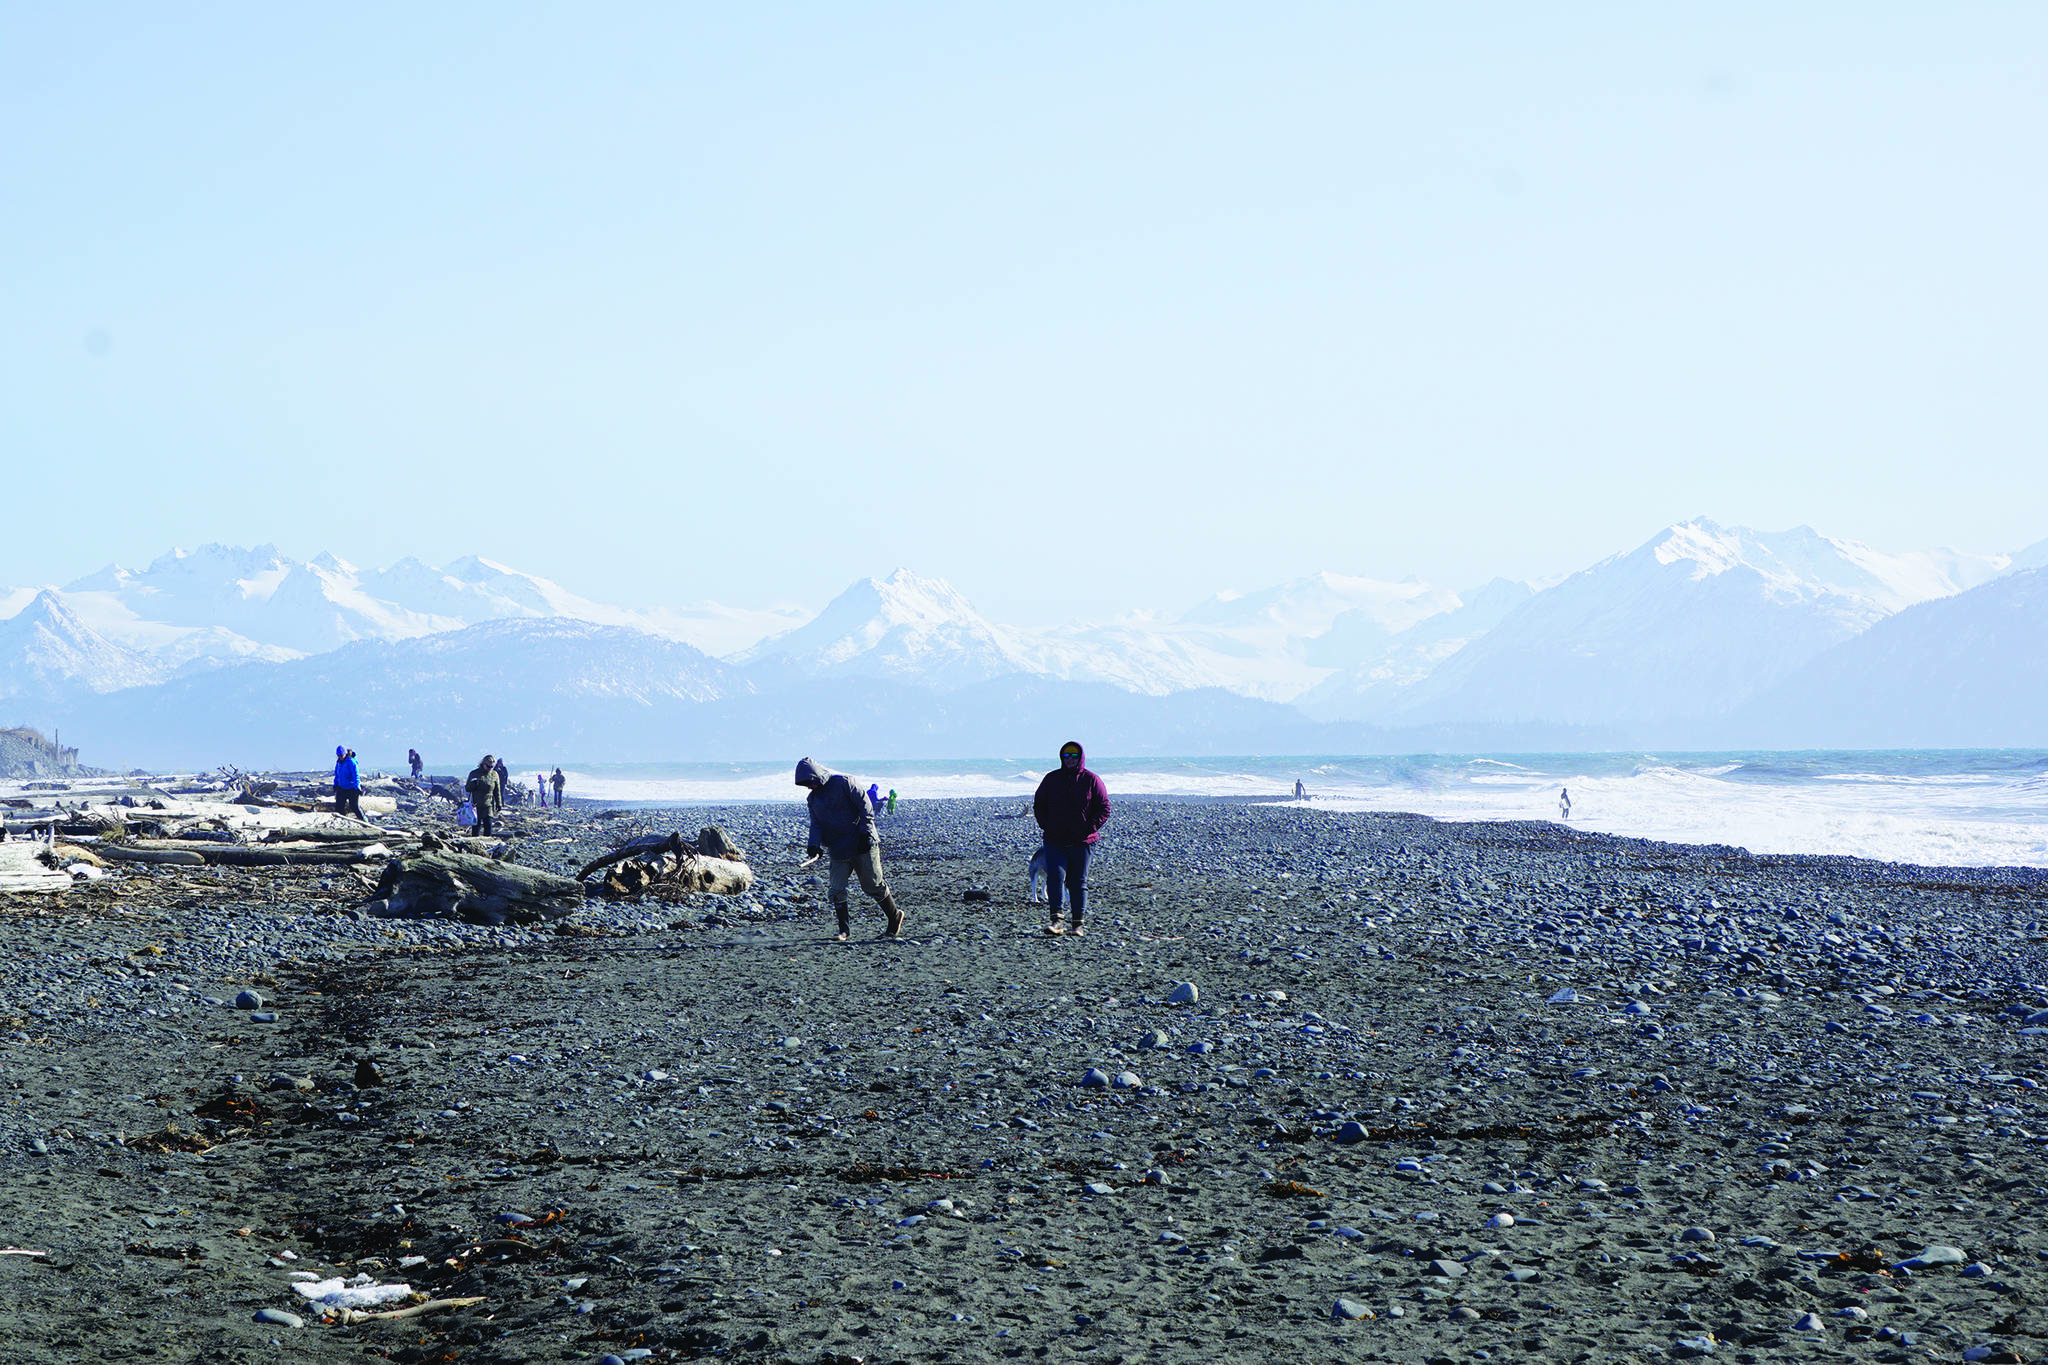 Beach walkers spread out at Bishop’s Beach on Sunday, March 22, 2020, in Homer, Alaska. During the pandemic, many fitness buffs have taken to the beach for exercise.(Photo by Michael Armstrong/Homer News)